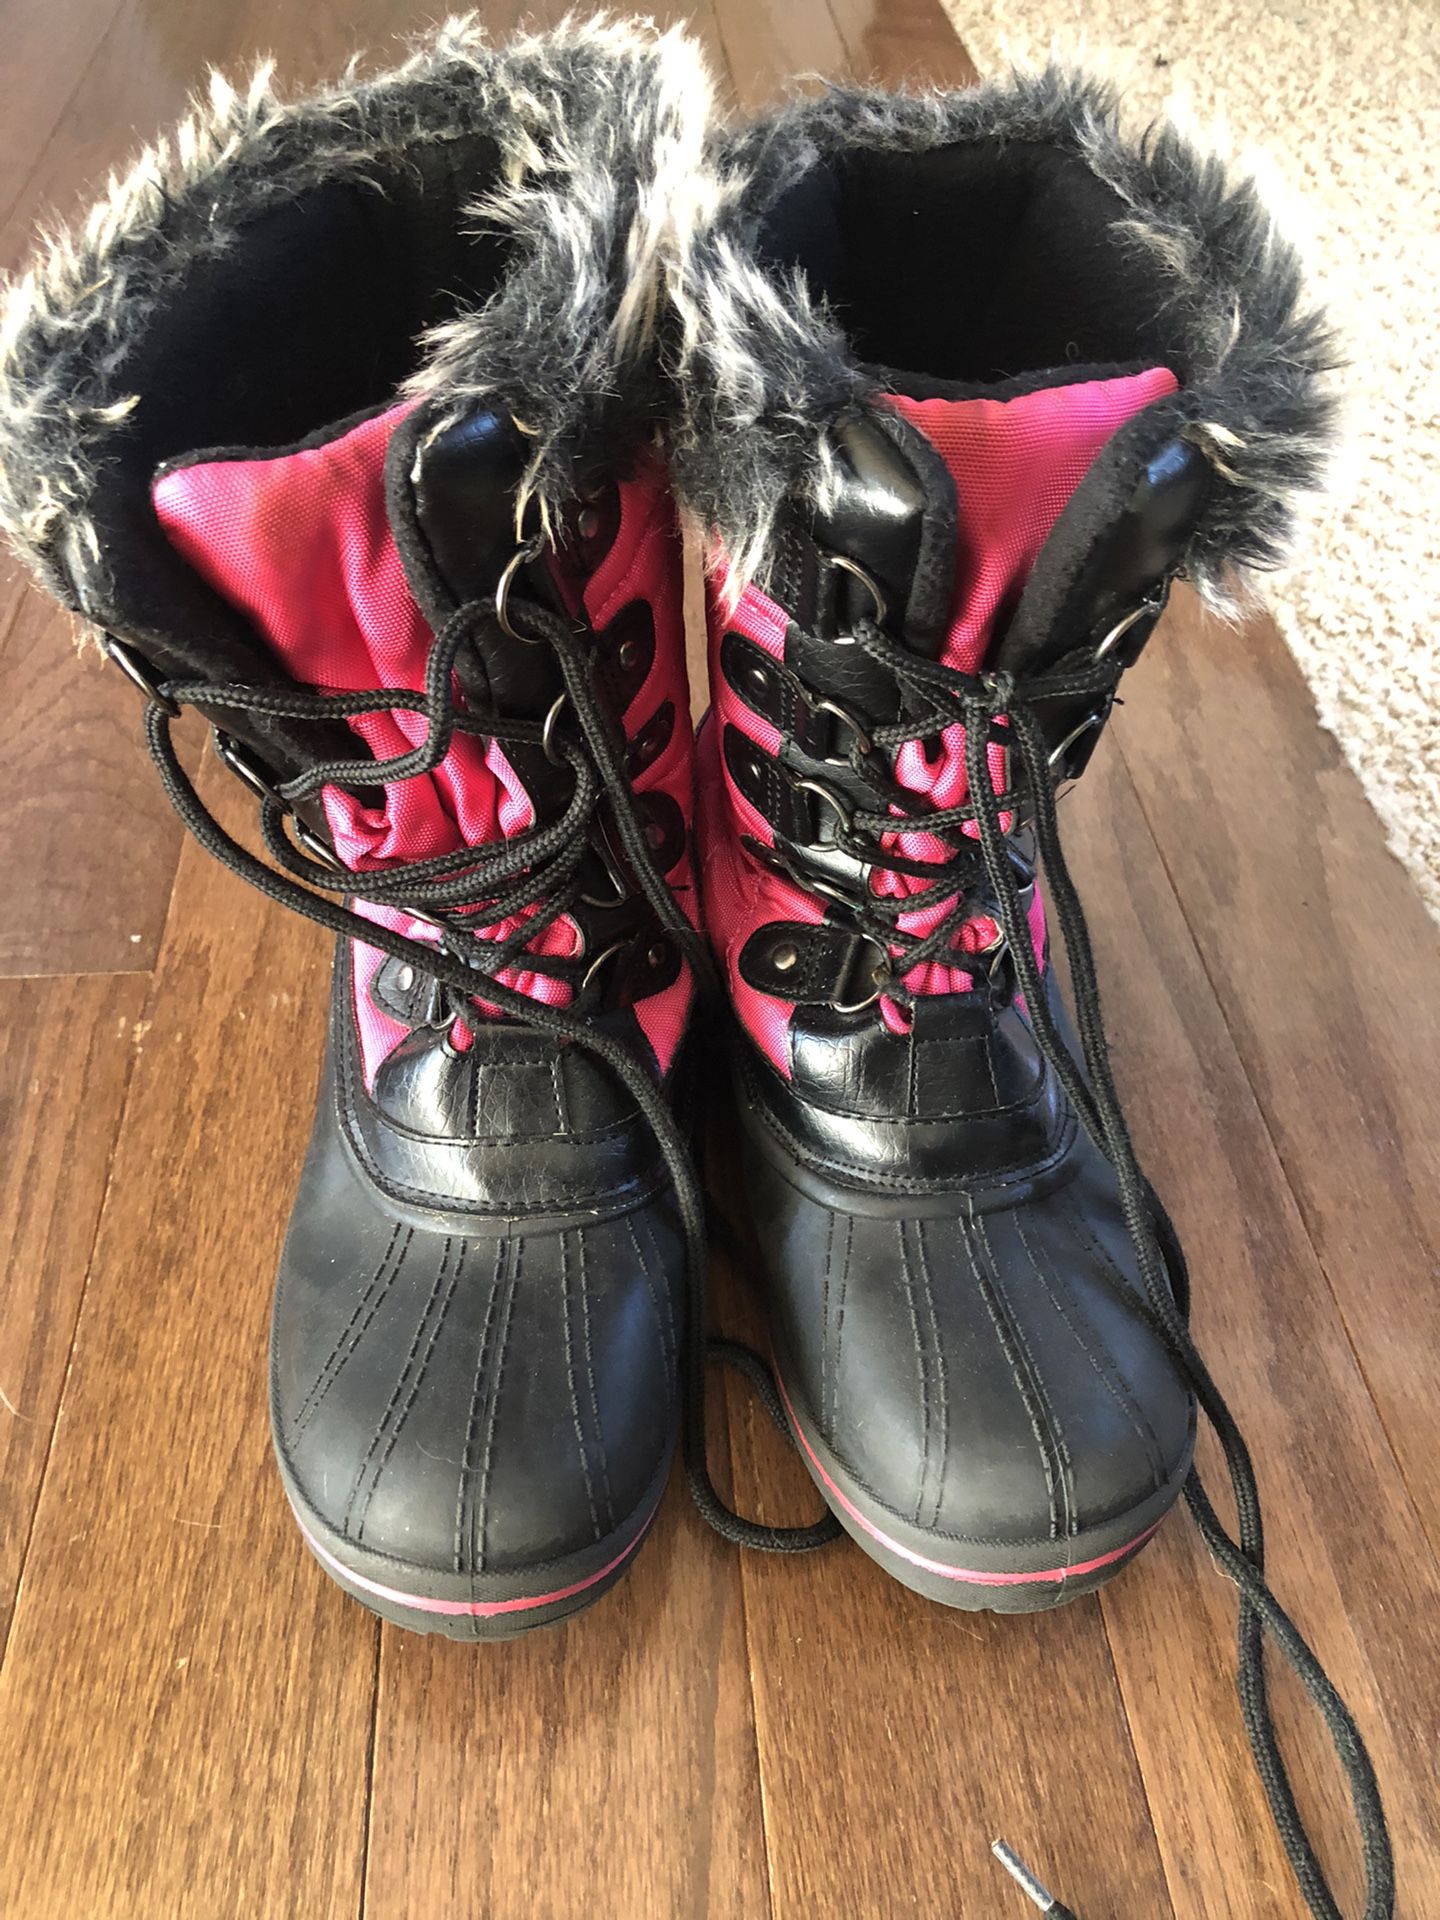 Girl’s Snow Boots